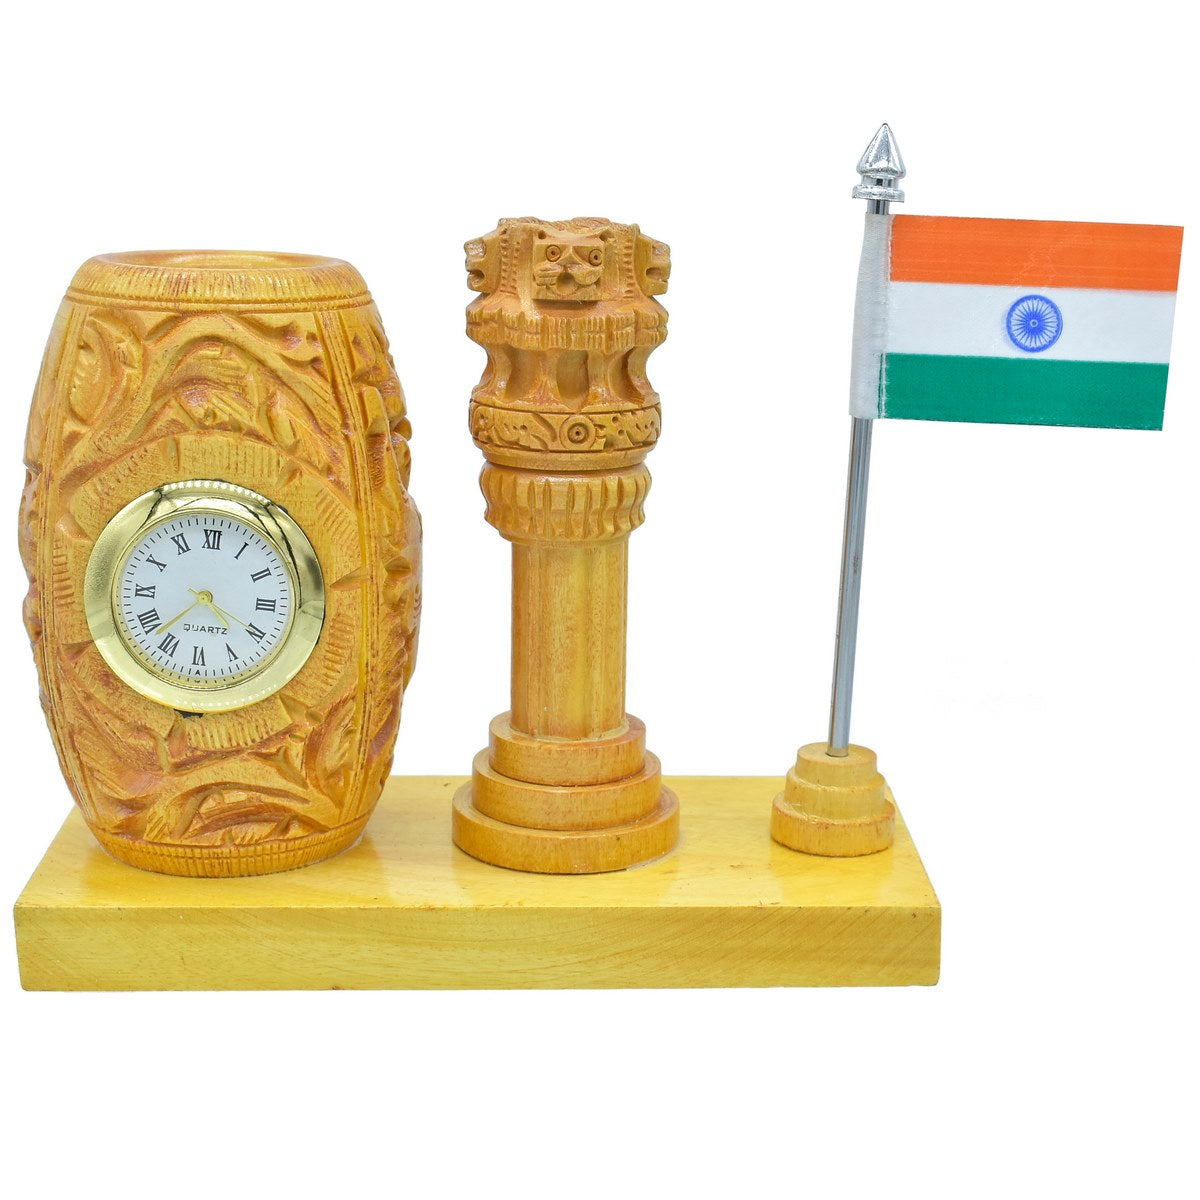 Wooden Pen Stand cum Clock with Ashoka Pillar and Indian Flag Table Top - For Corporate Gifting, Office, School, College Use, Independence Day, Republic Day Gift Item JAWTTP01